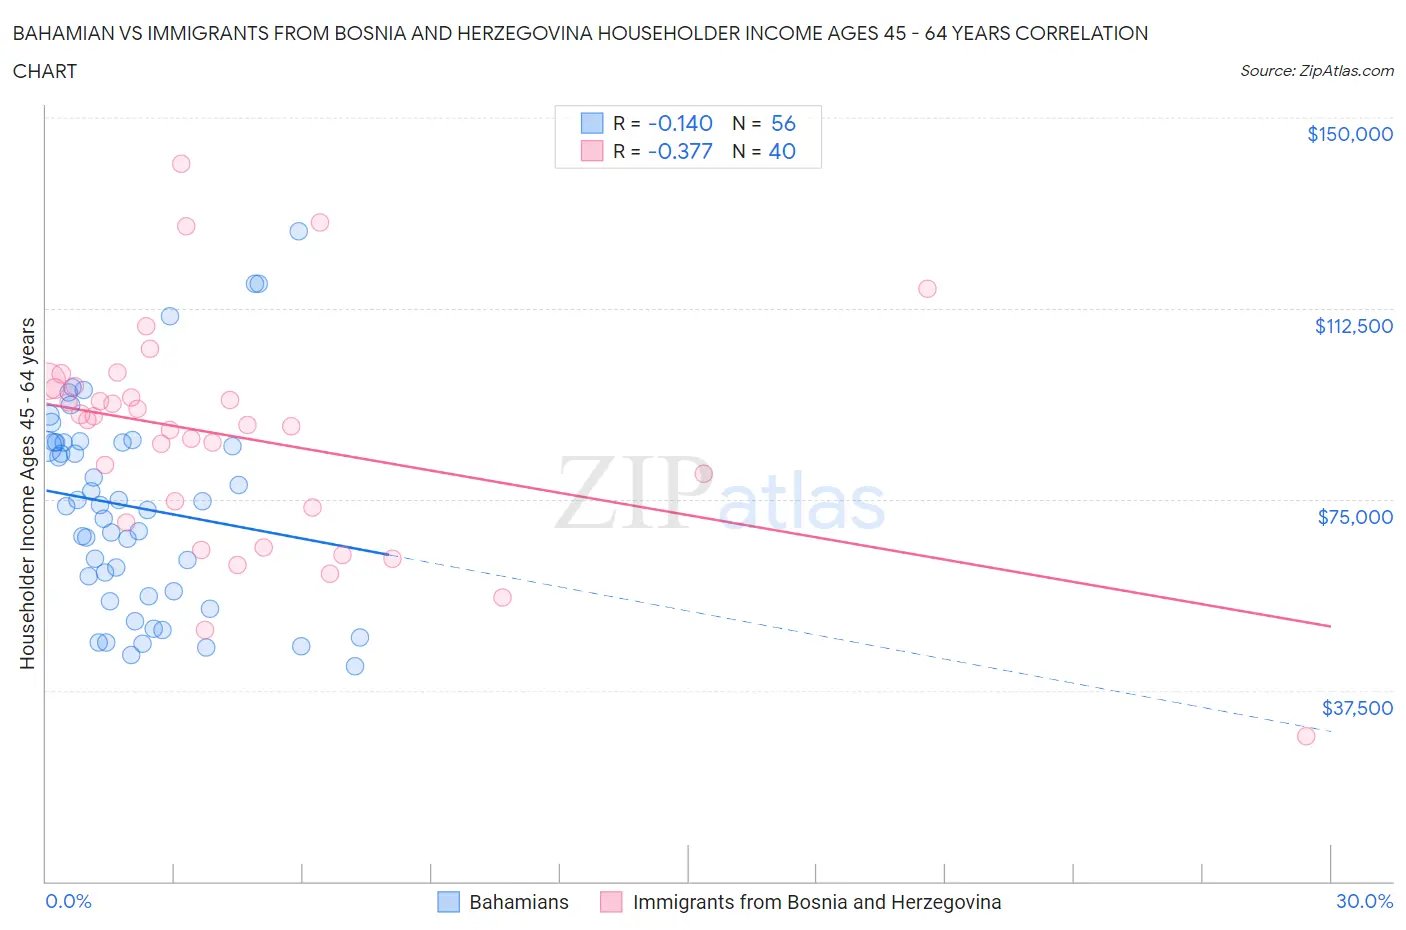 Bahamian vs Immigrants from Bosnia and Herzegovina Householder Income Ages 45 - 64 years